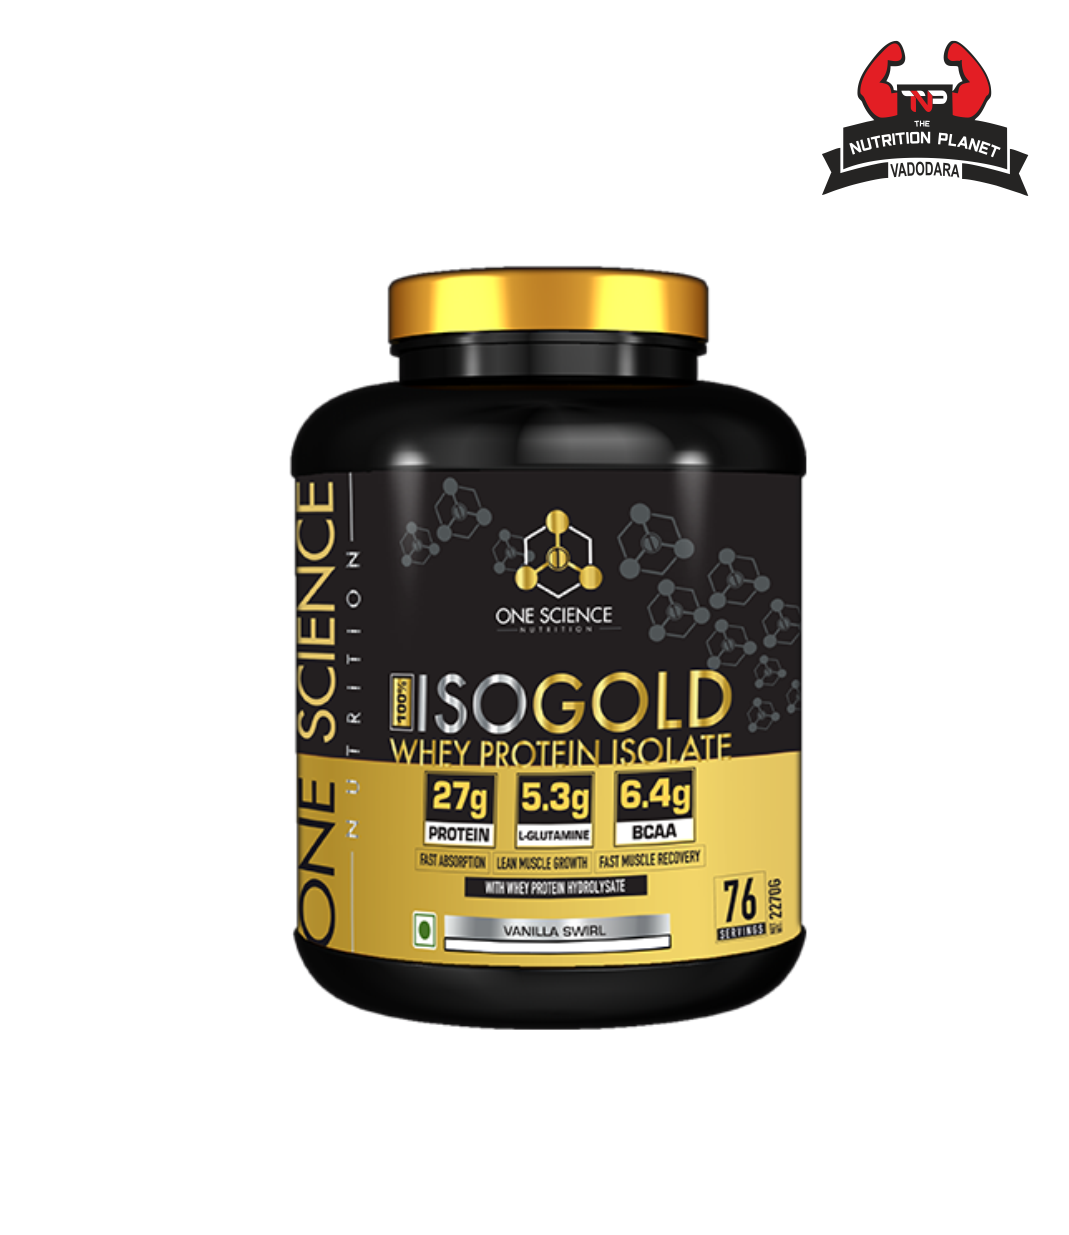 One Science Nutrition 100% Iso Gold Whey Protein 5 lbs, 2.27 kg [Made from Grass Fed Whey]- 27g Protein, 5.3g Glutamine, 6.4g BCAA